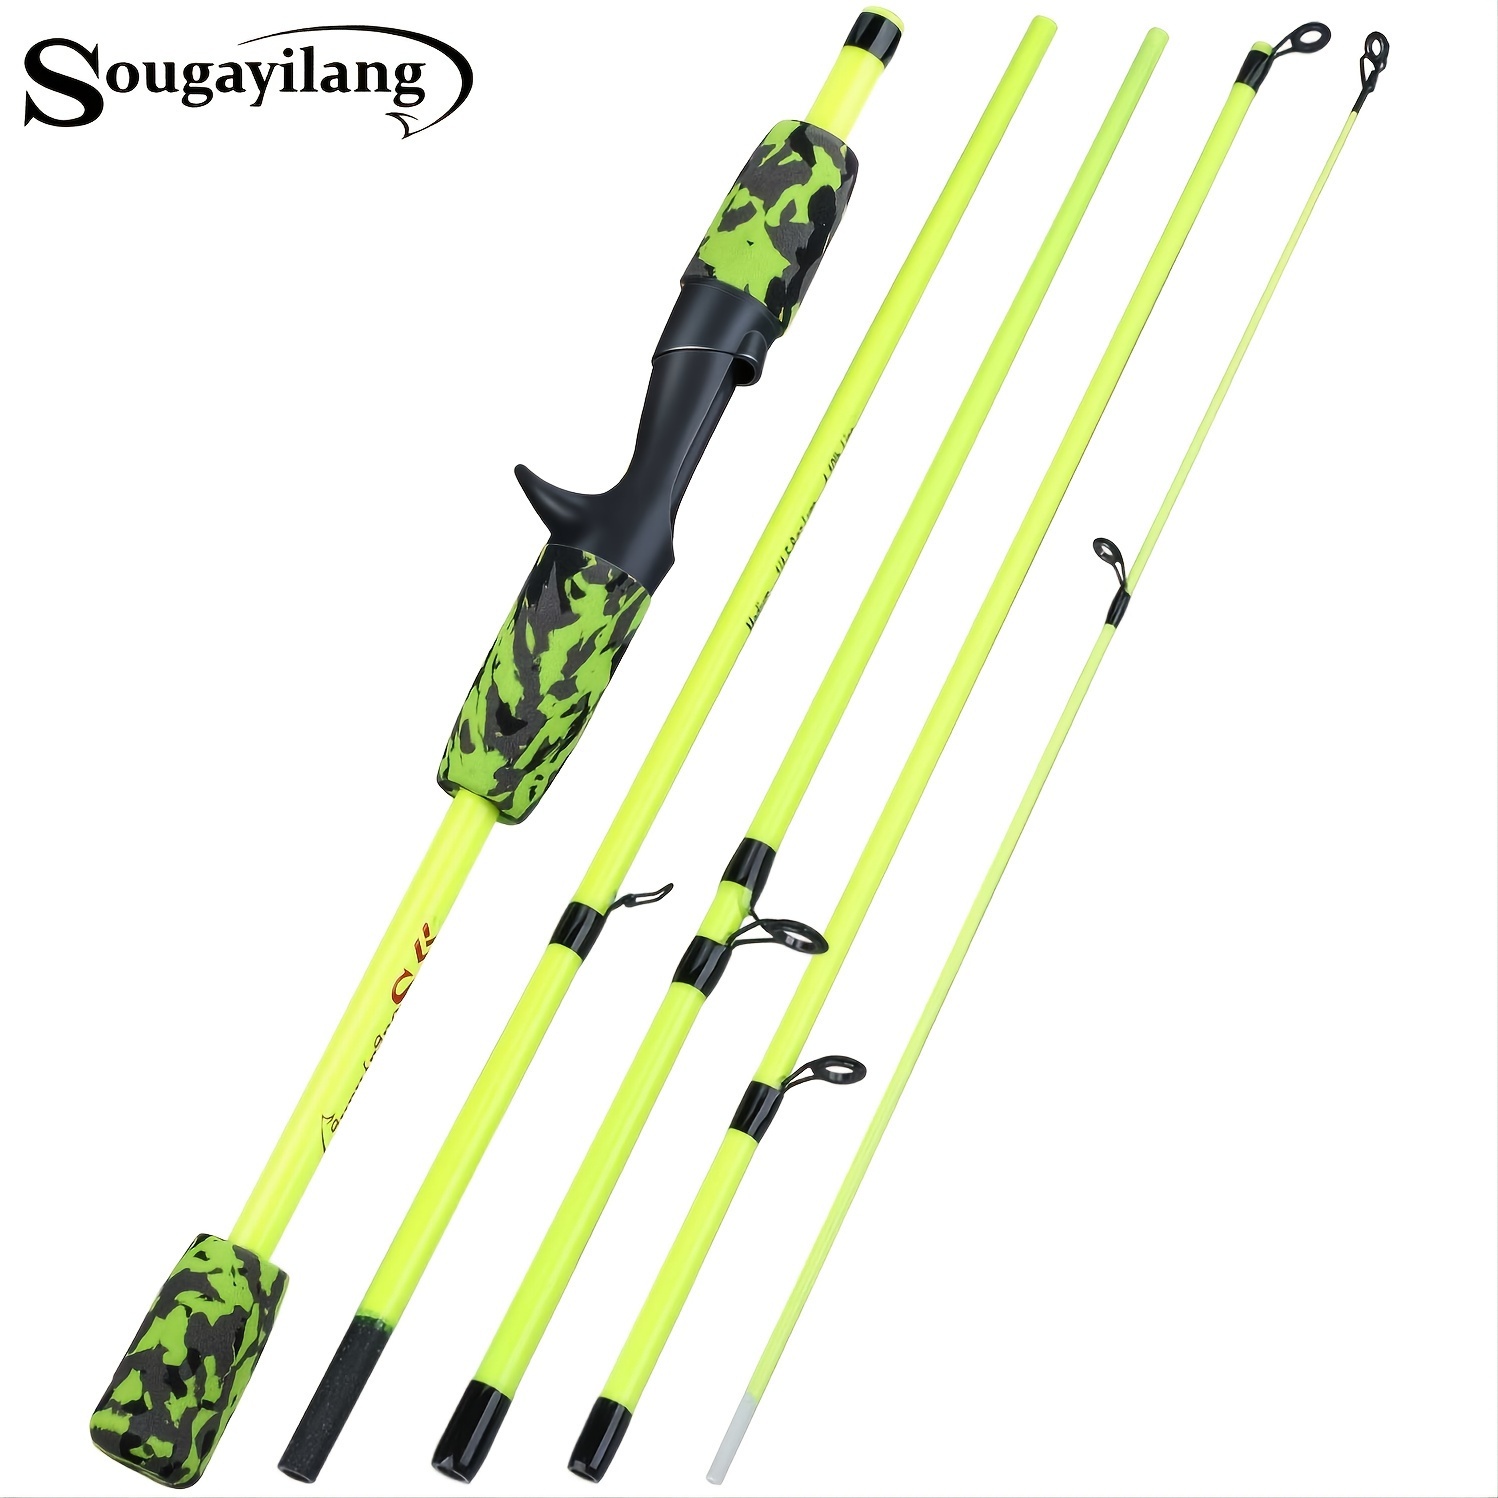 

Sougayilang Ultralight 5-section Travel Fishing Rod With Comfortable Eva Handle - Perfect For On-the-go Fishing